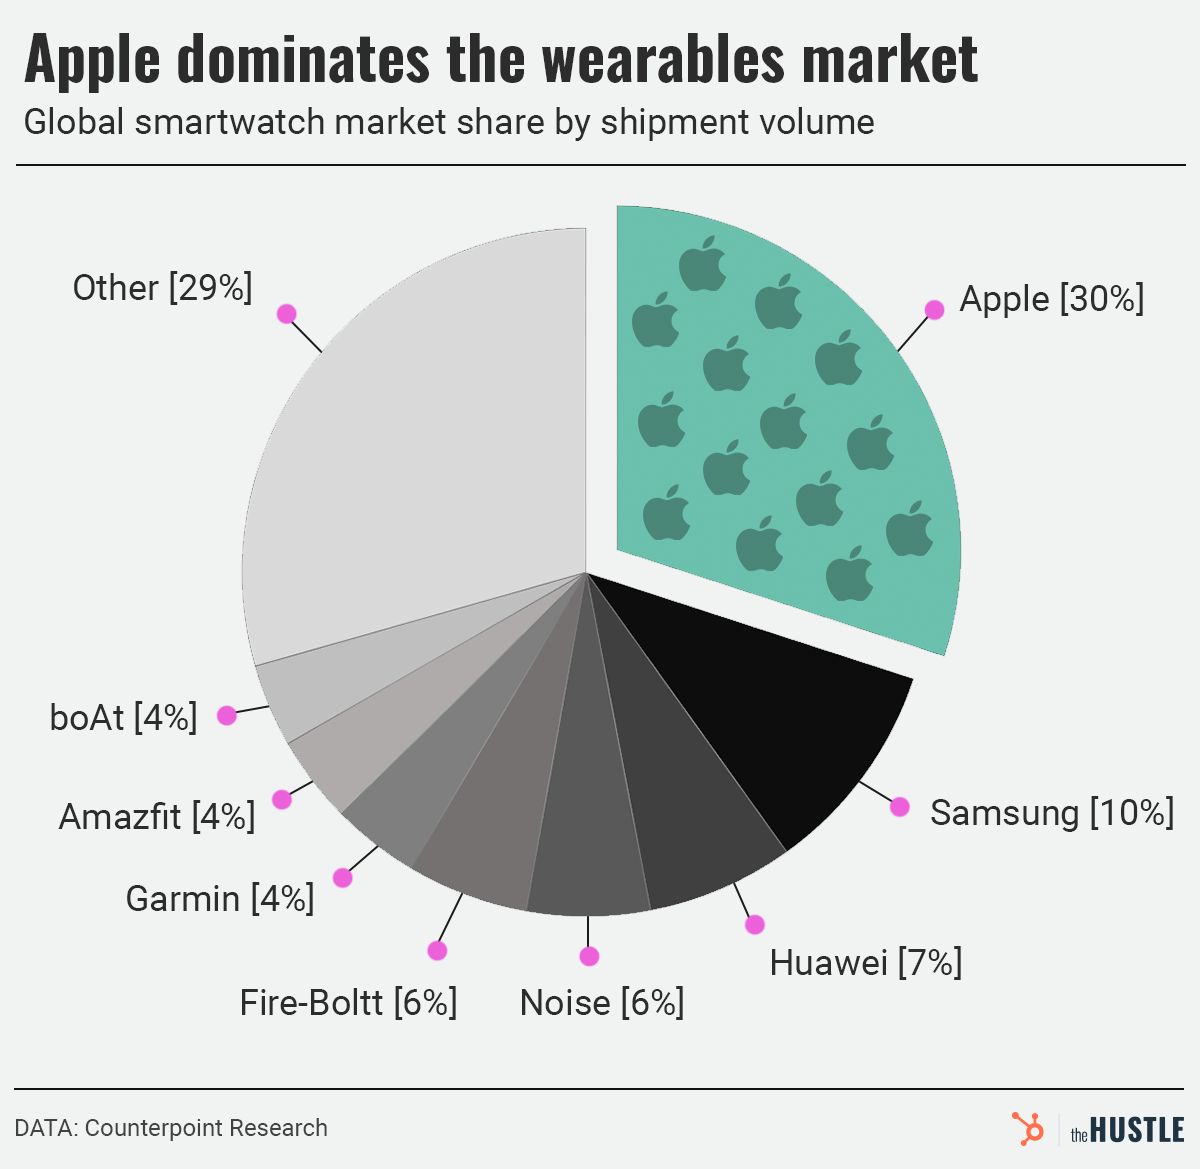 Apple dominates the wearables market